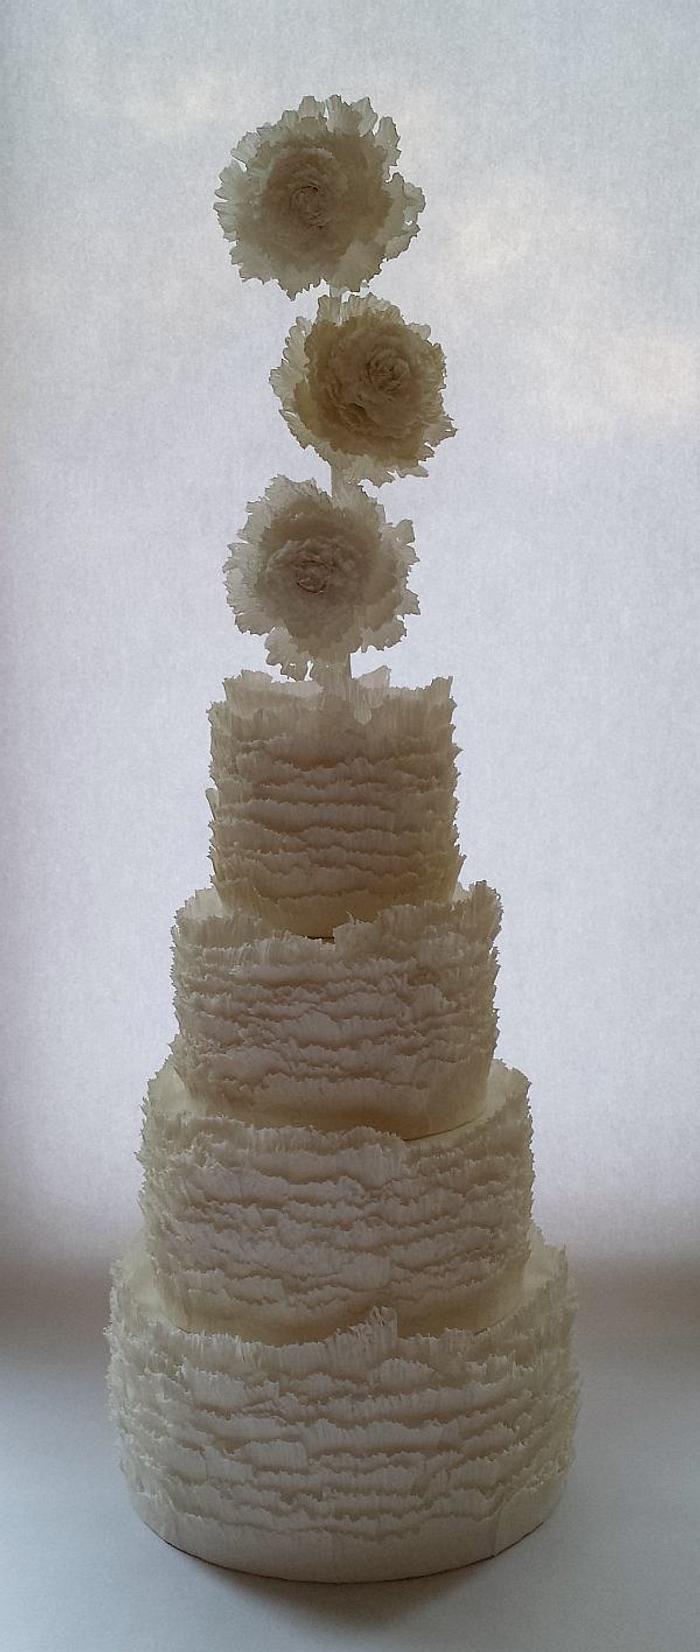 Frilled wedding cake with over-sized flowers